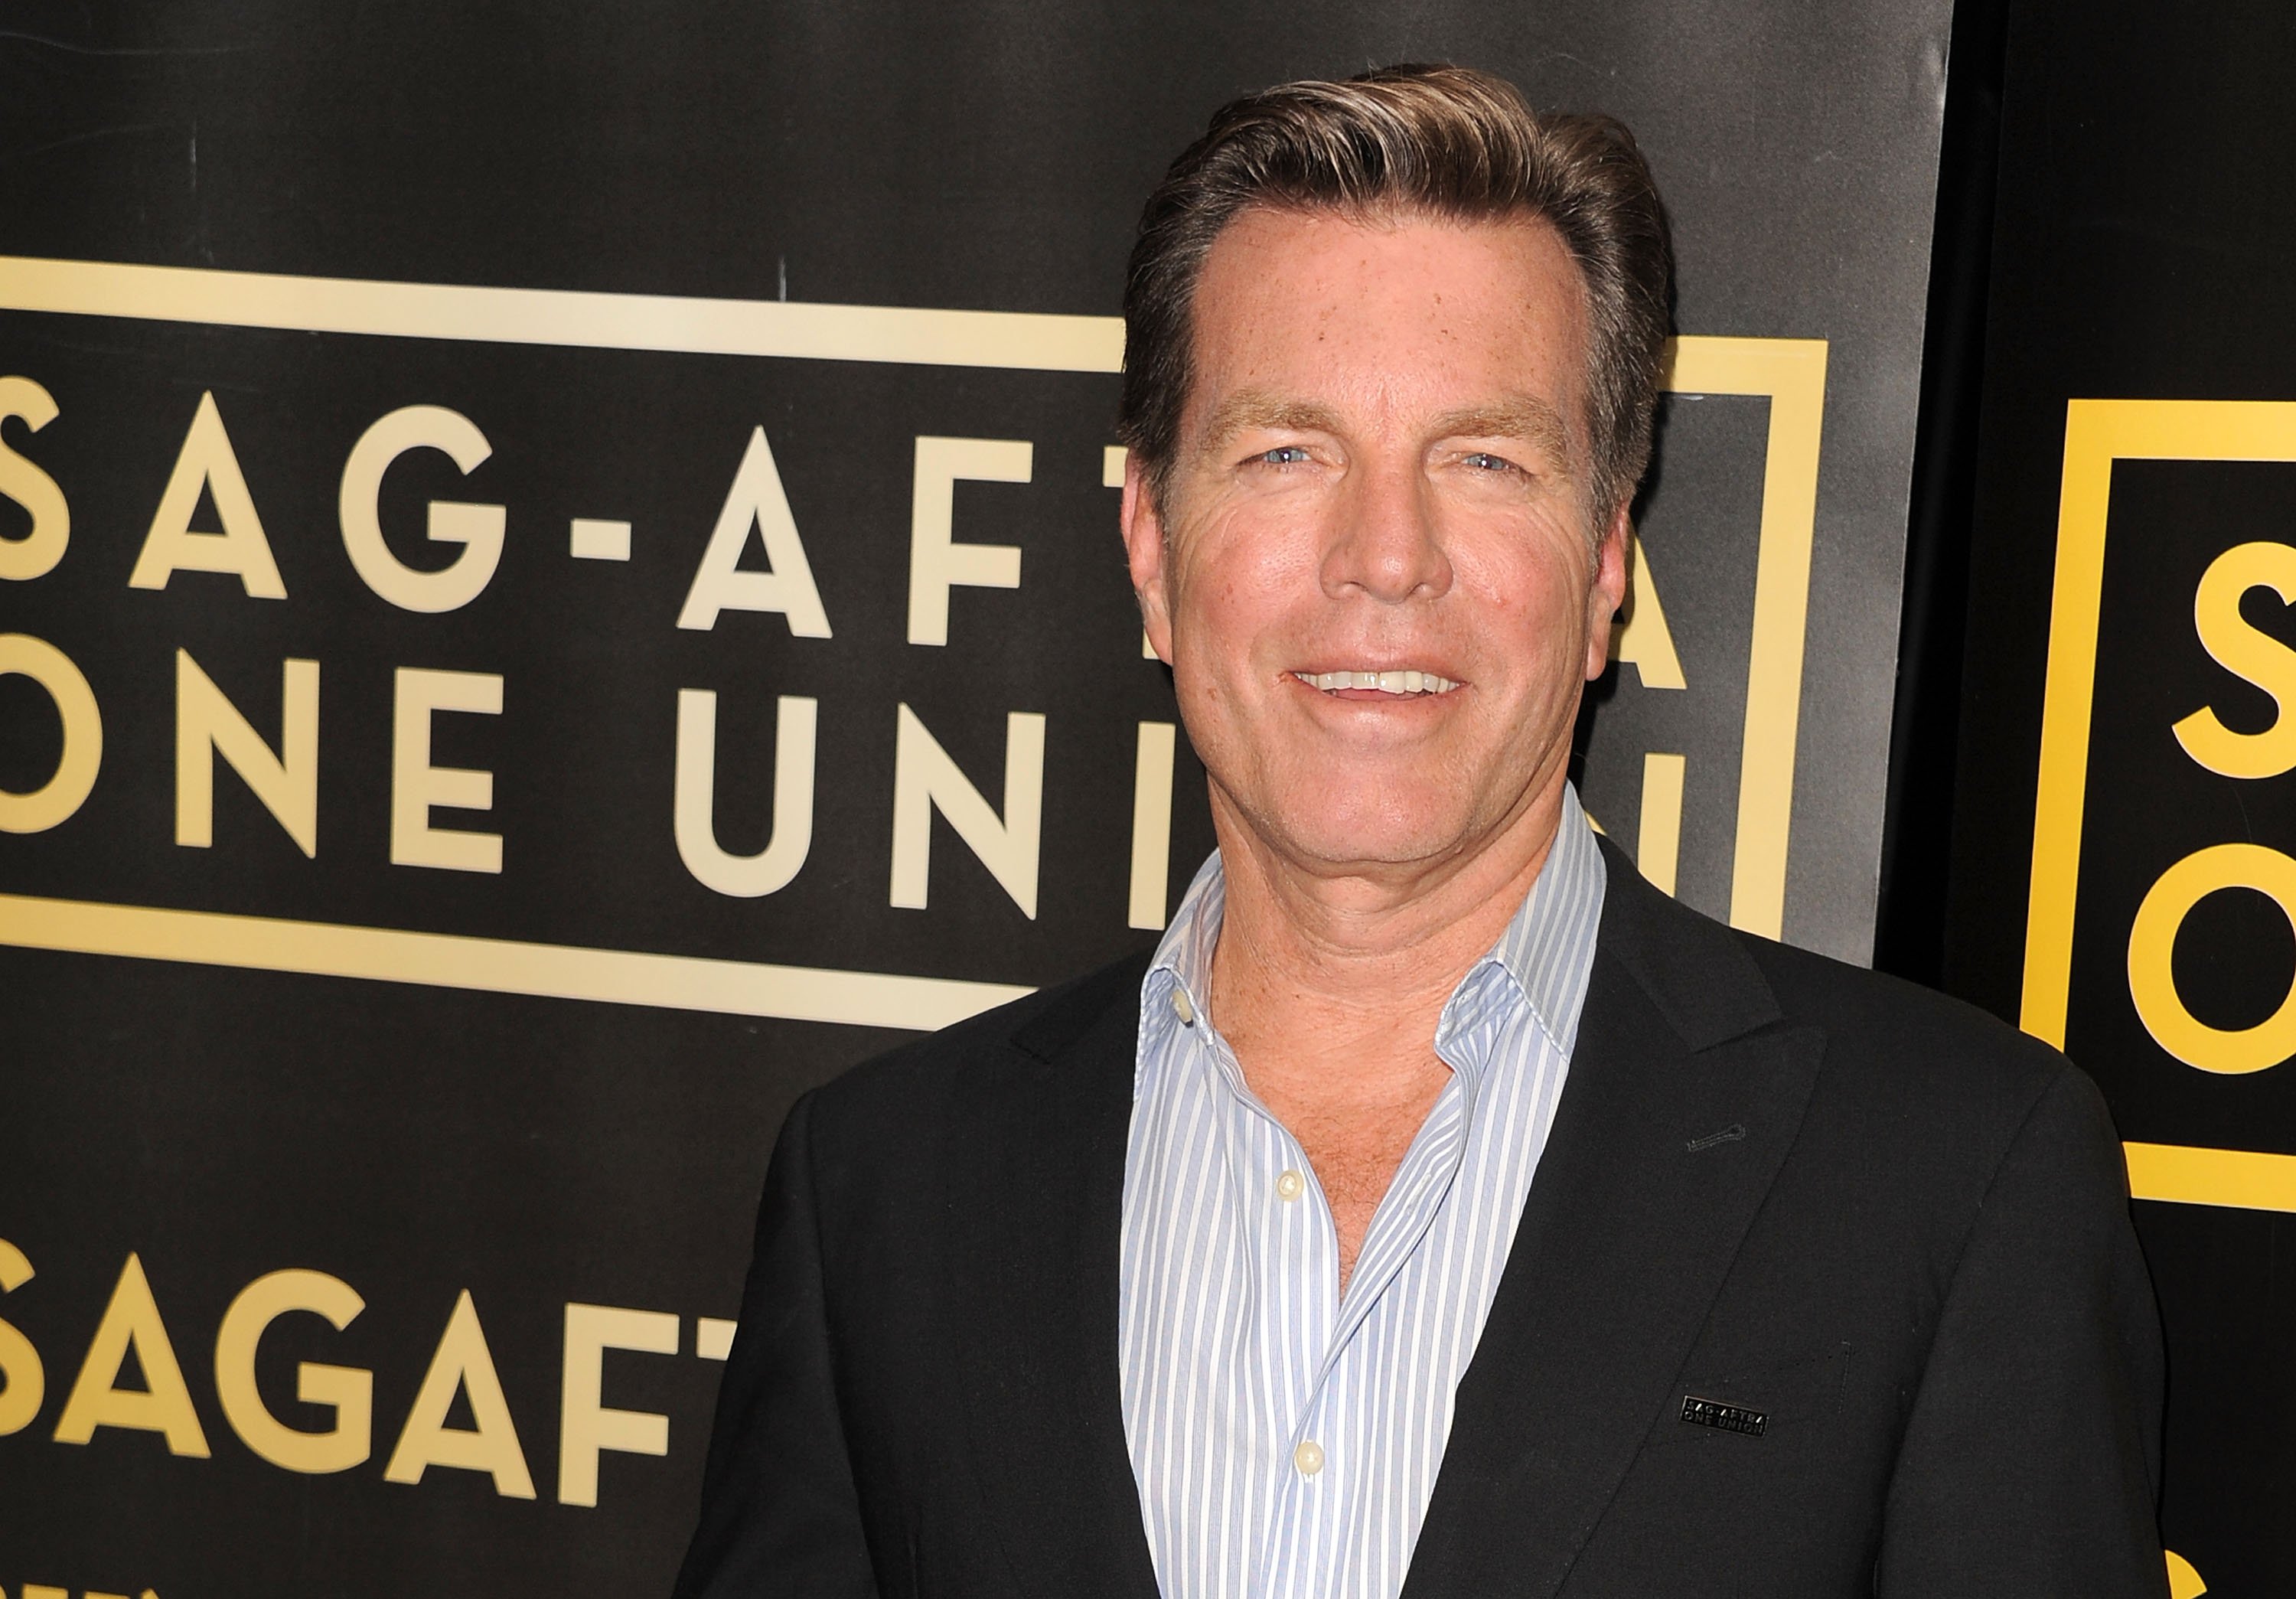 'The Young and the Restless' actor Peter Bergman wearing a black suit and blue shirt during a red carpet appearance.